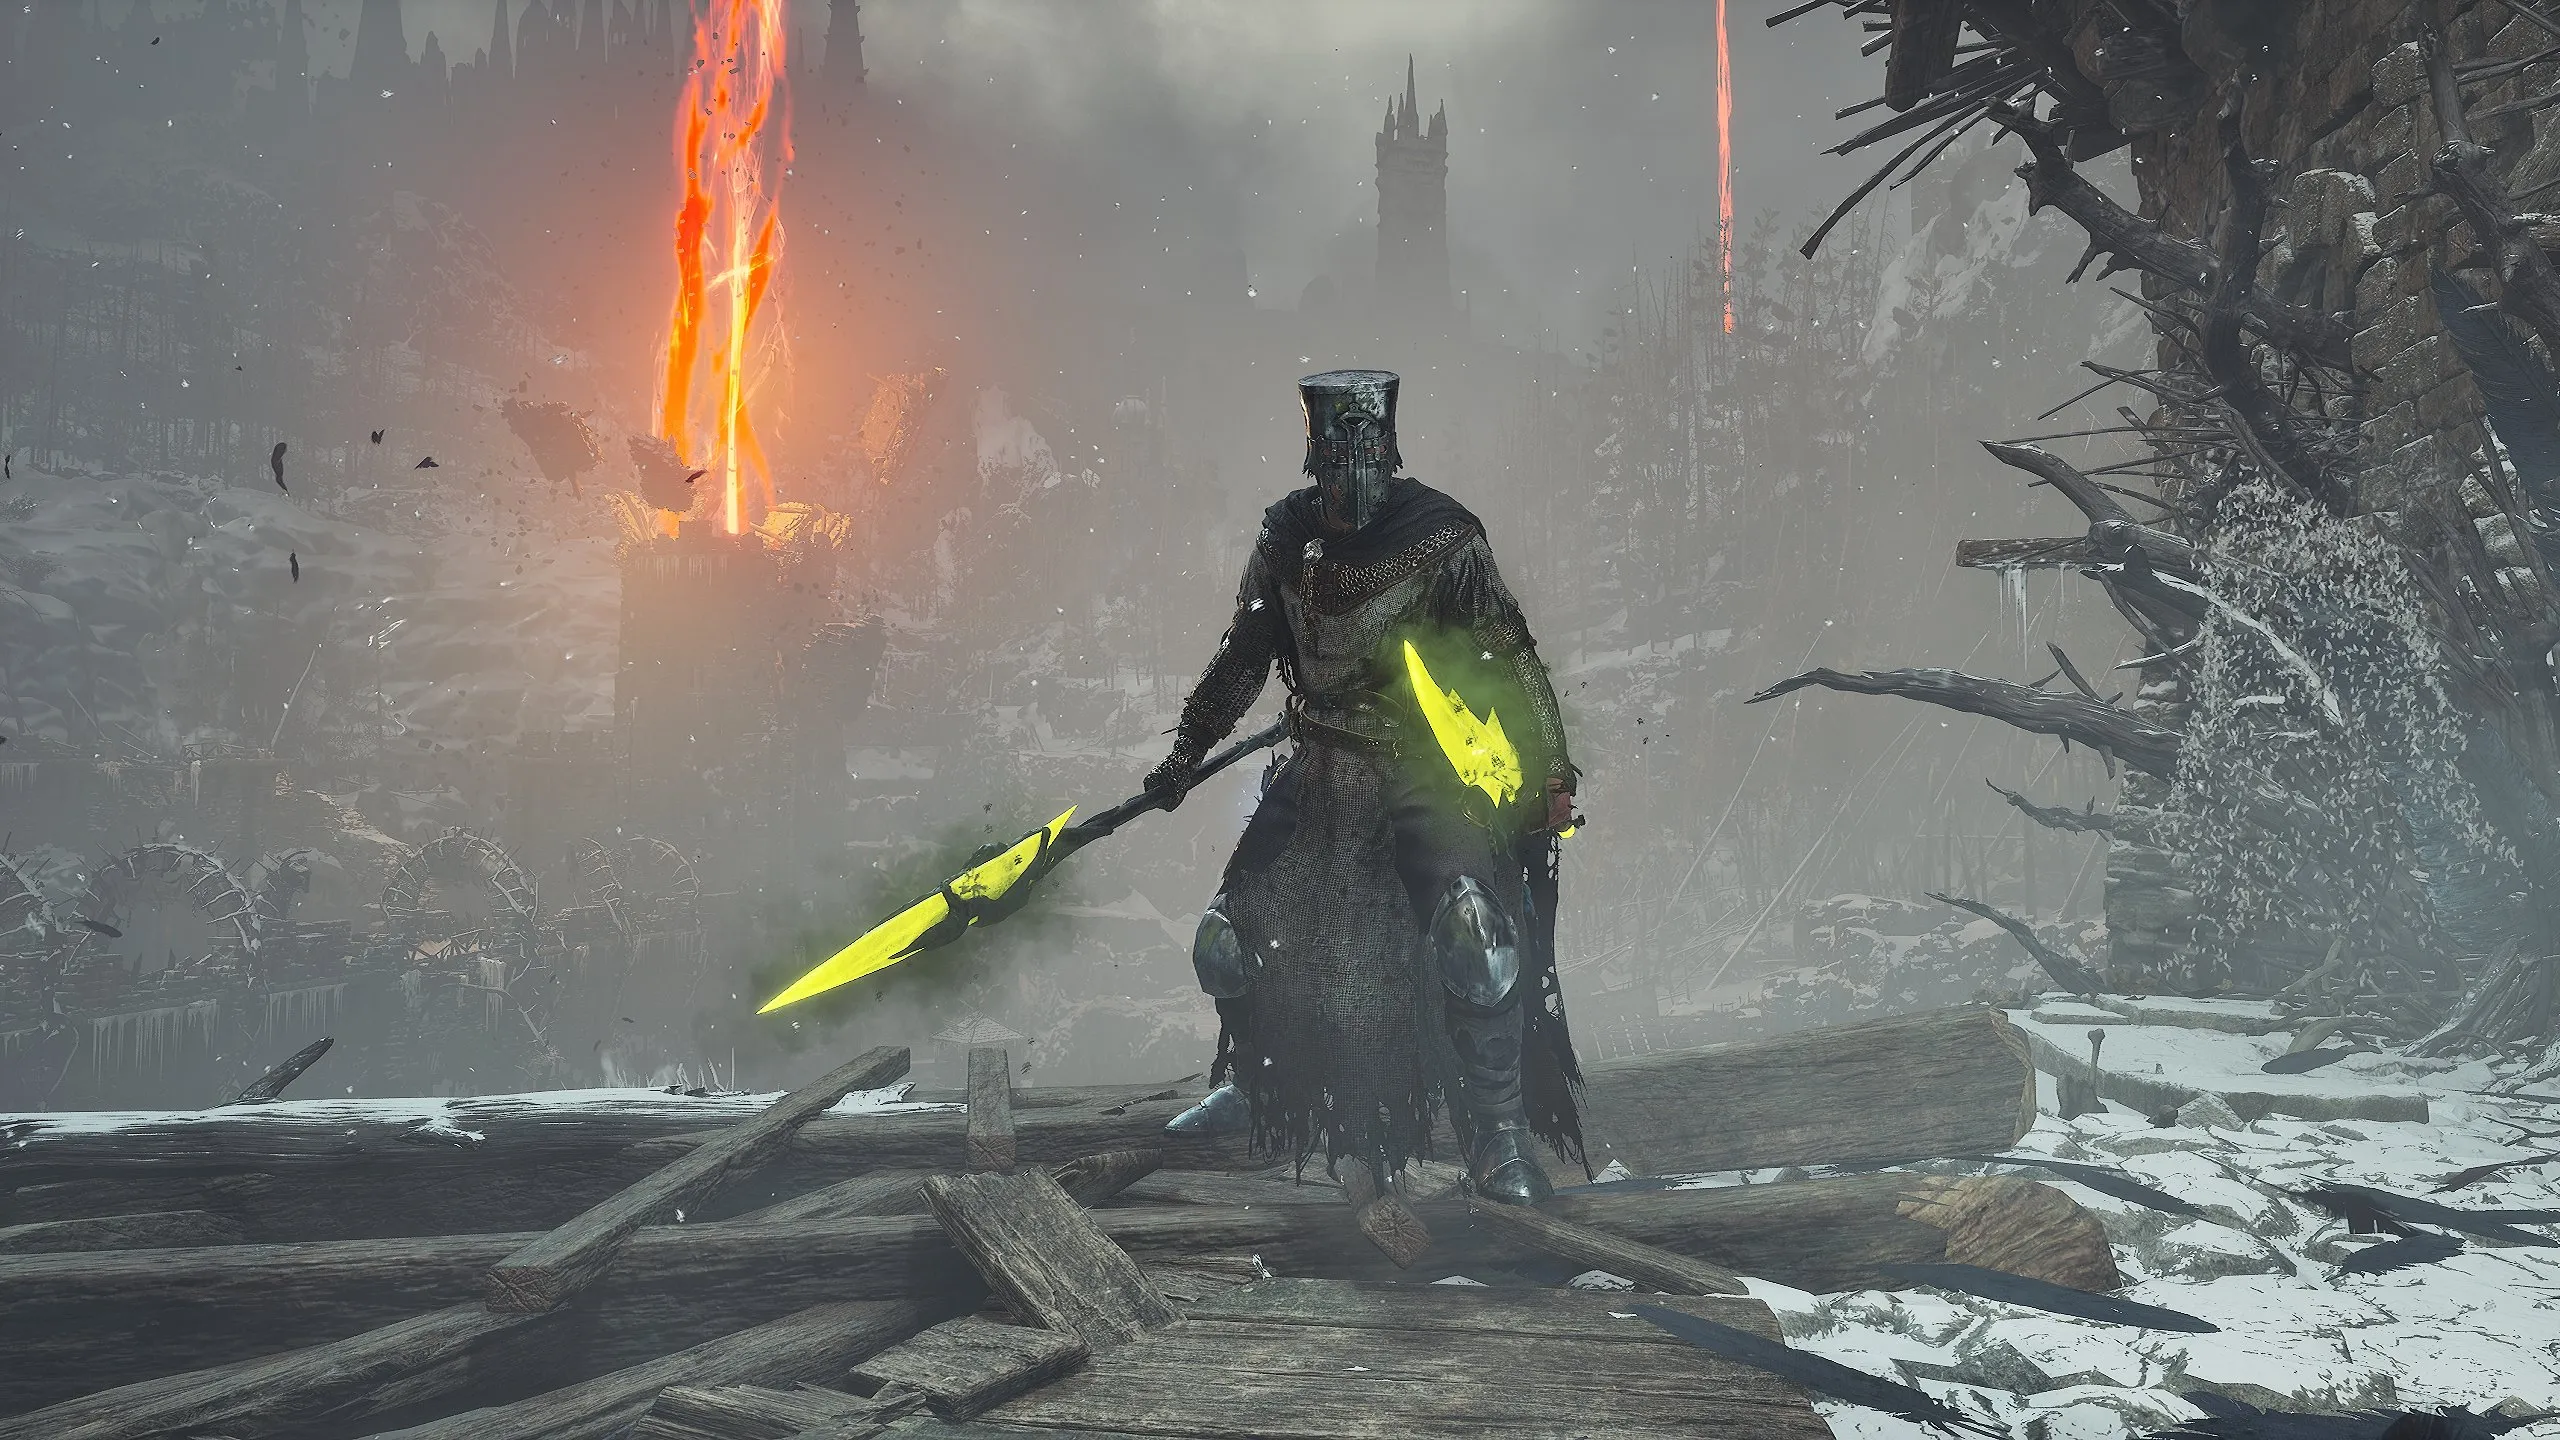 Lords of the Fallen Seasonal Content Starts Today, New Quests and Gear